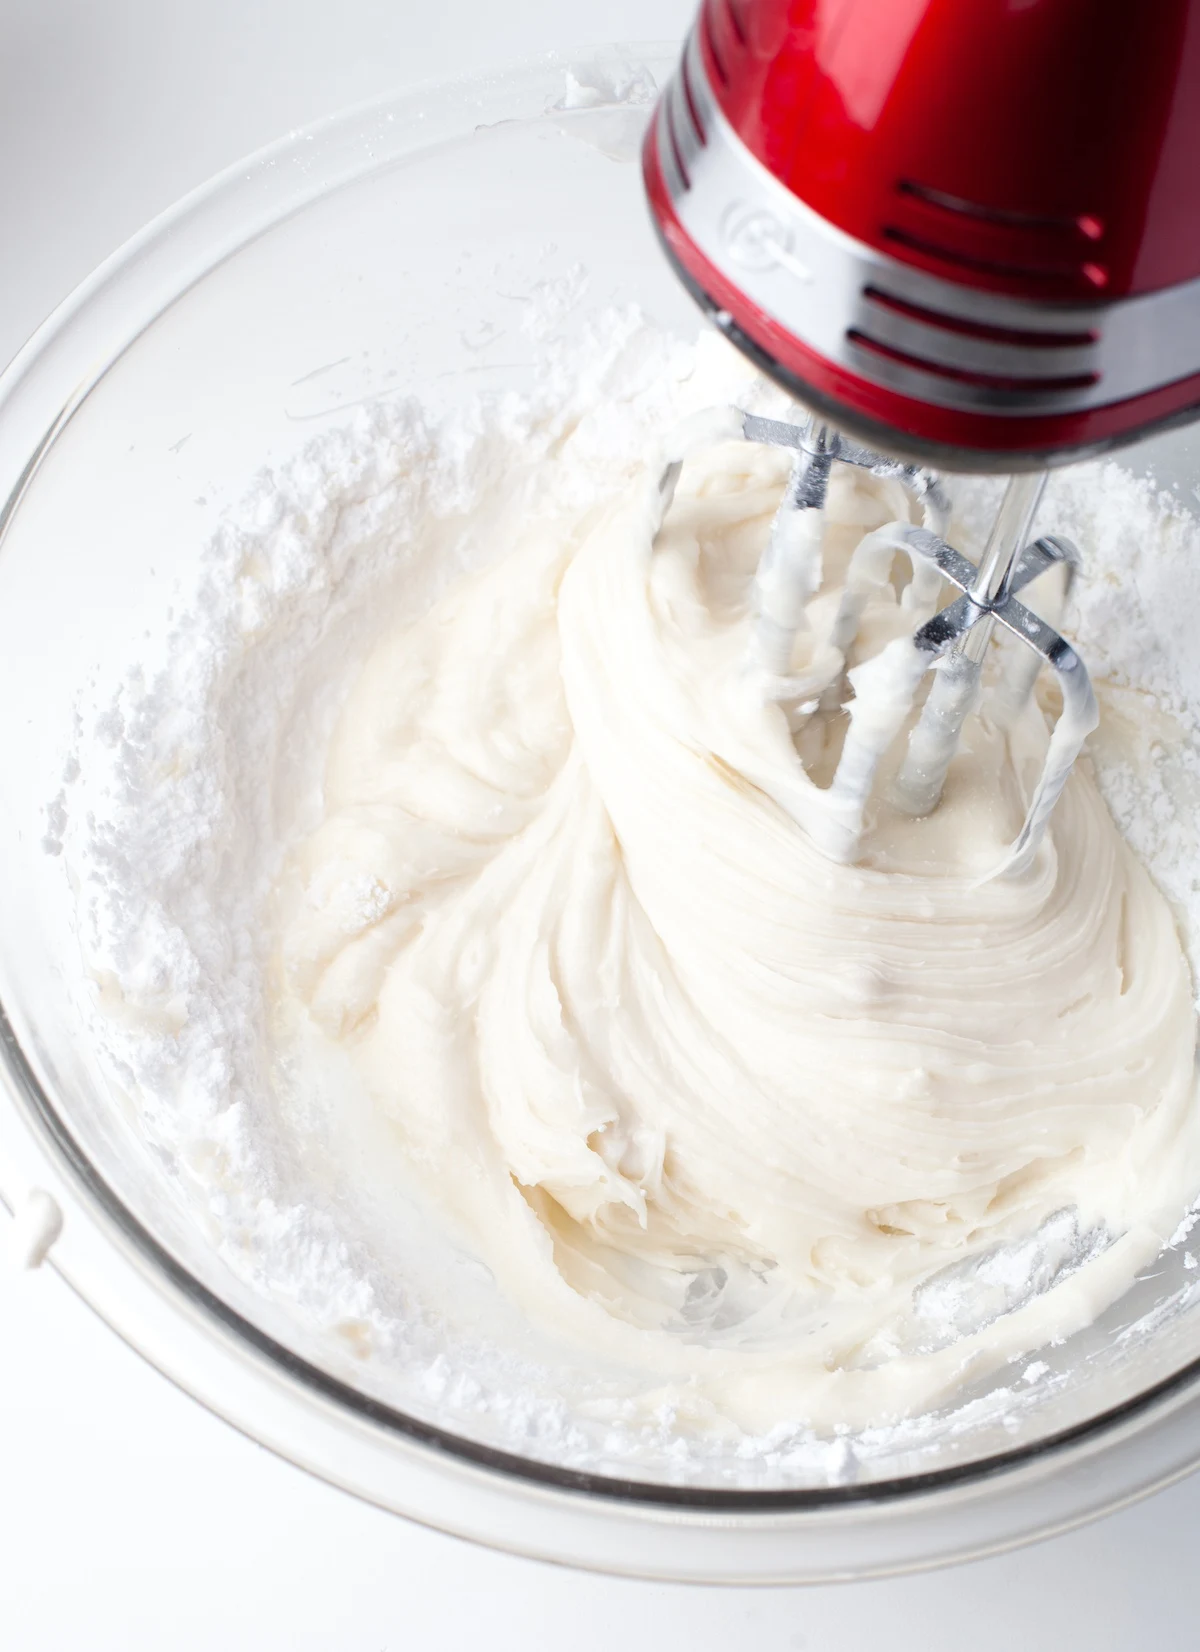 Mixer blending powdered sugar into the butter and cream cheese